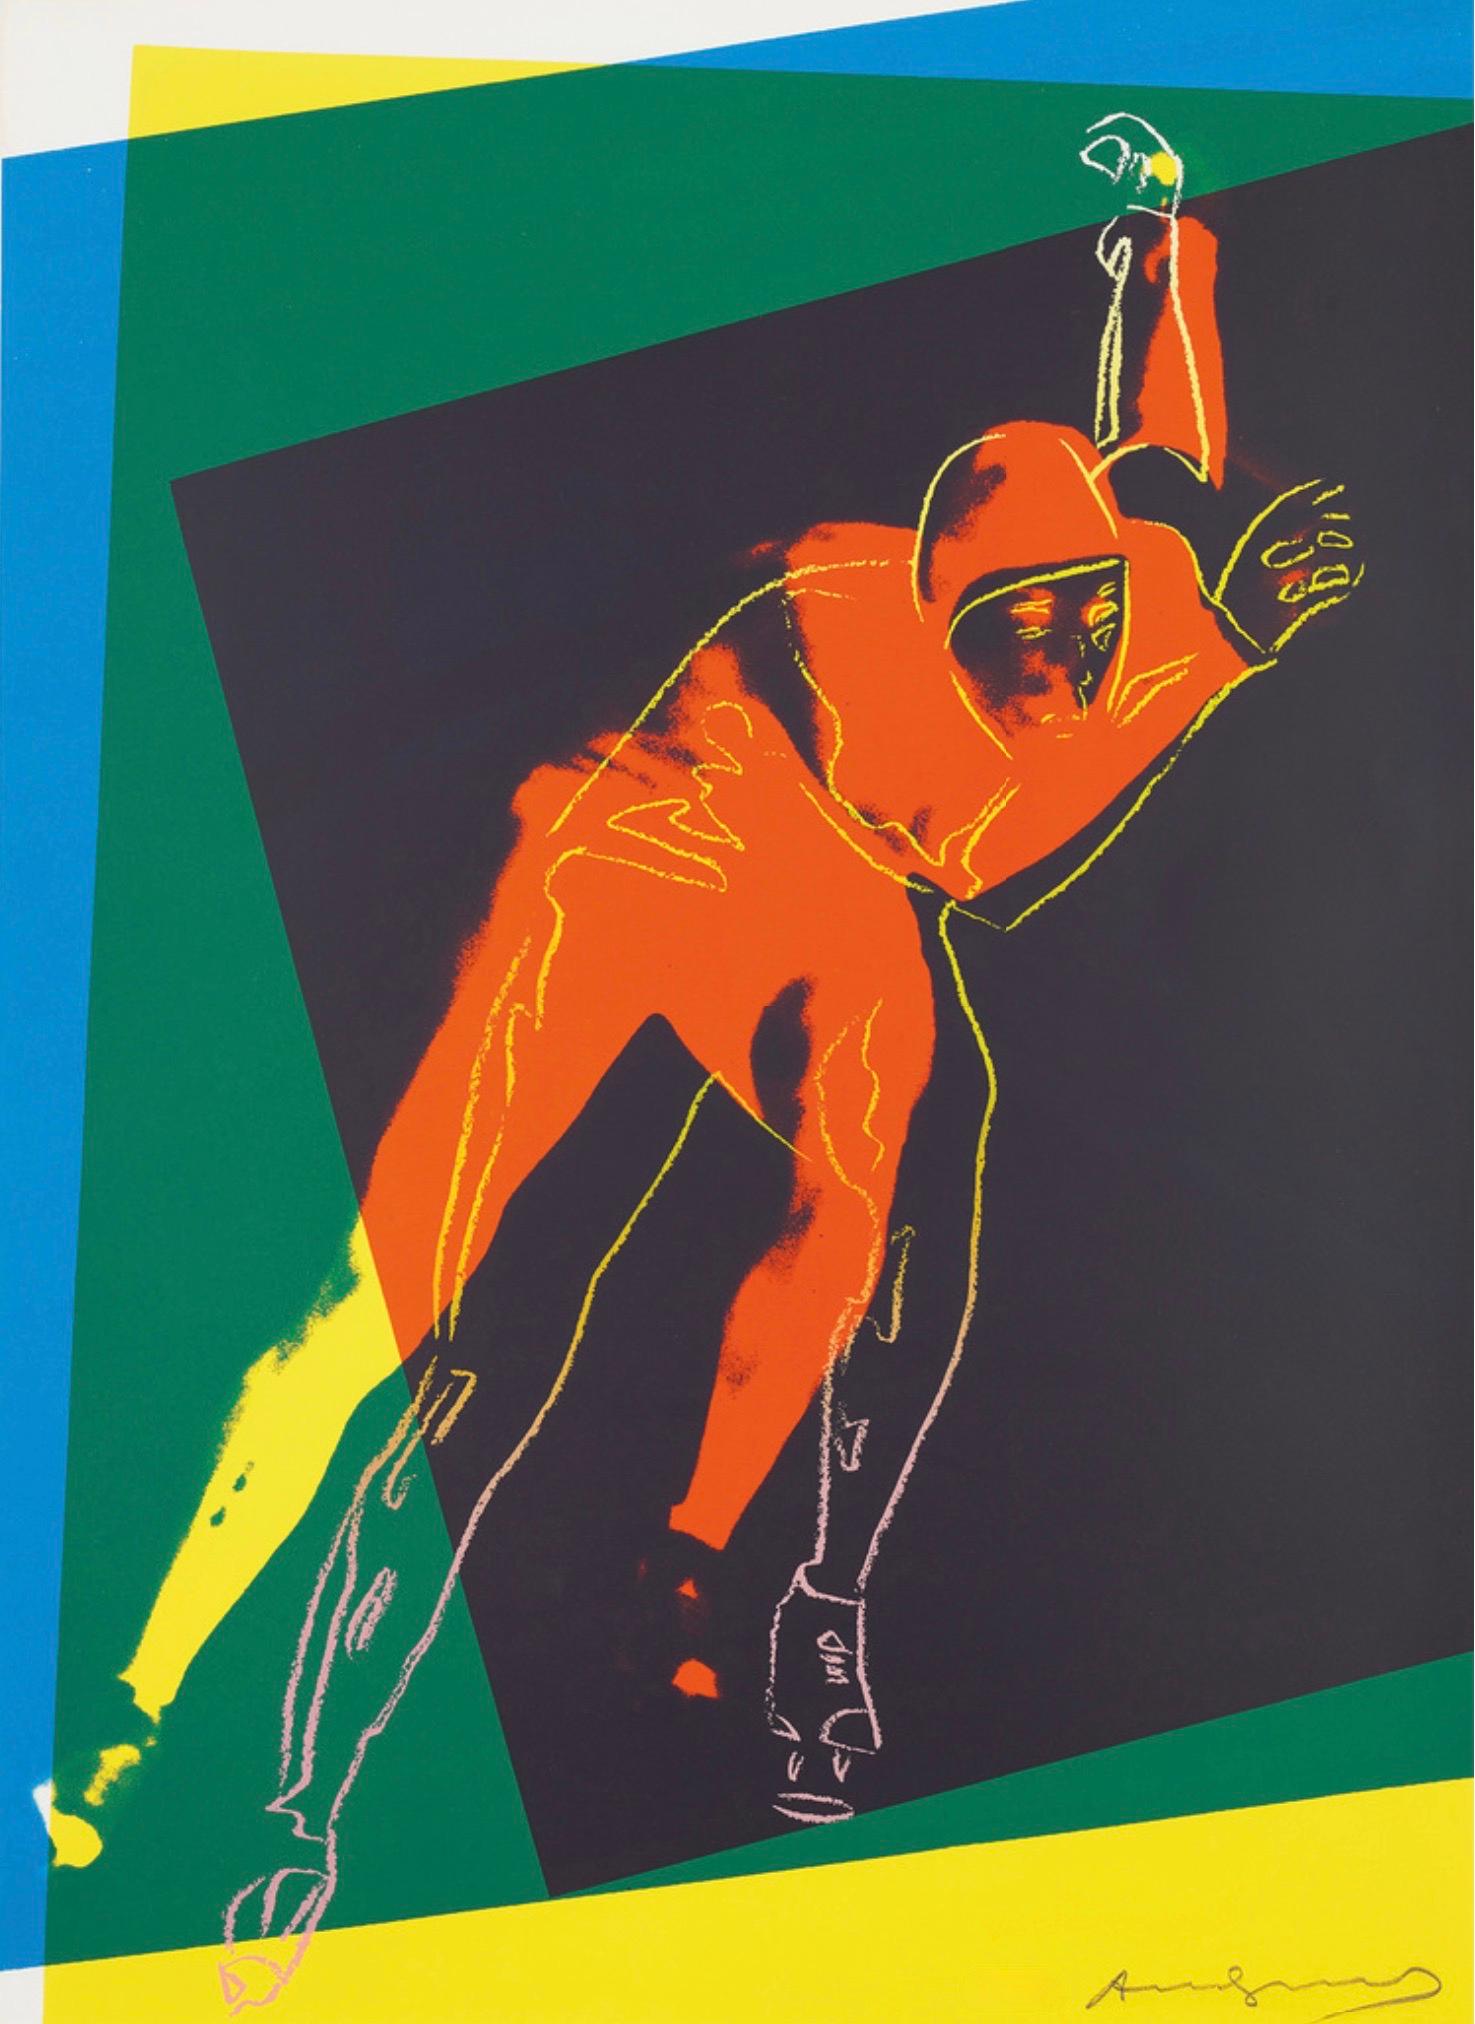 Speed Skater 2 (from Art and Sports Portfolio) - Print by Andy Warhol